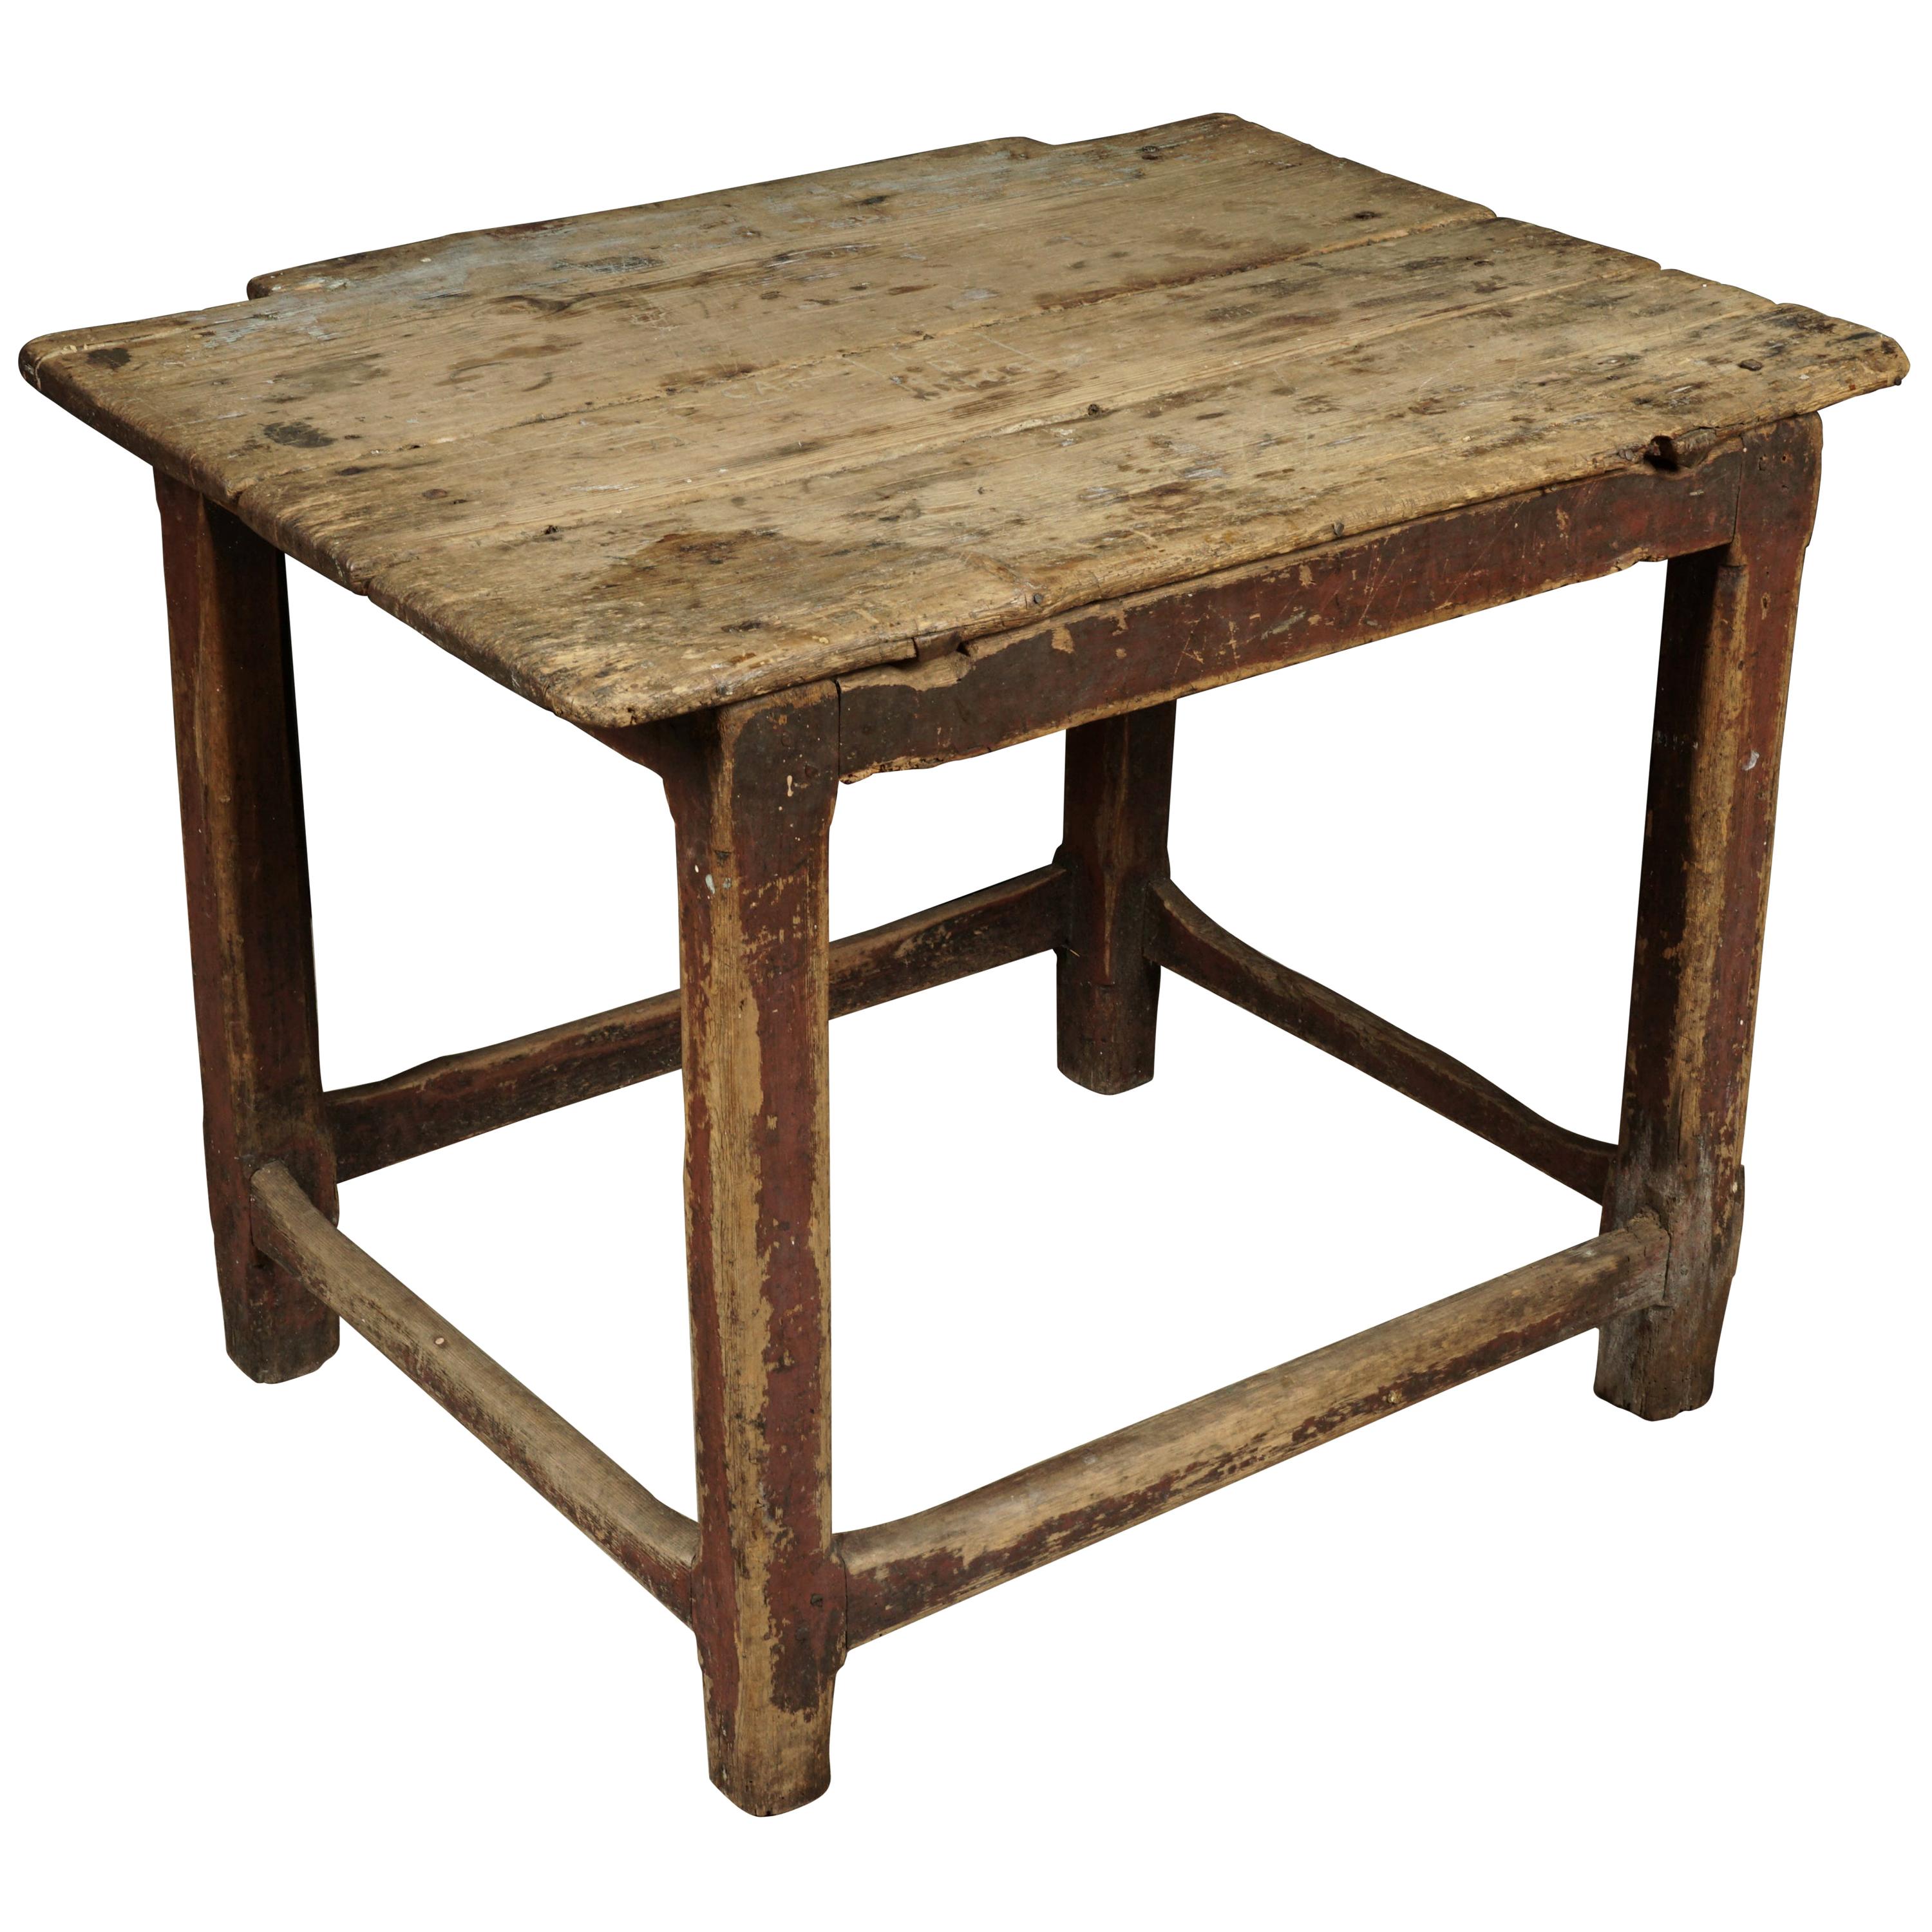 Early Primitive Table from Sweden, circa 1850